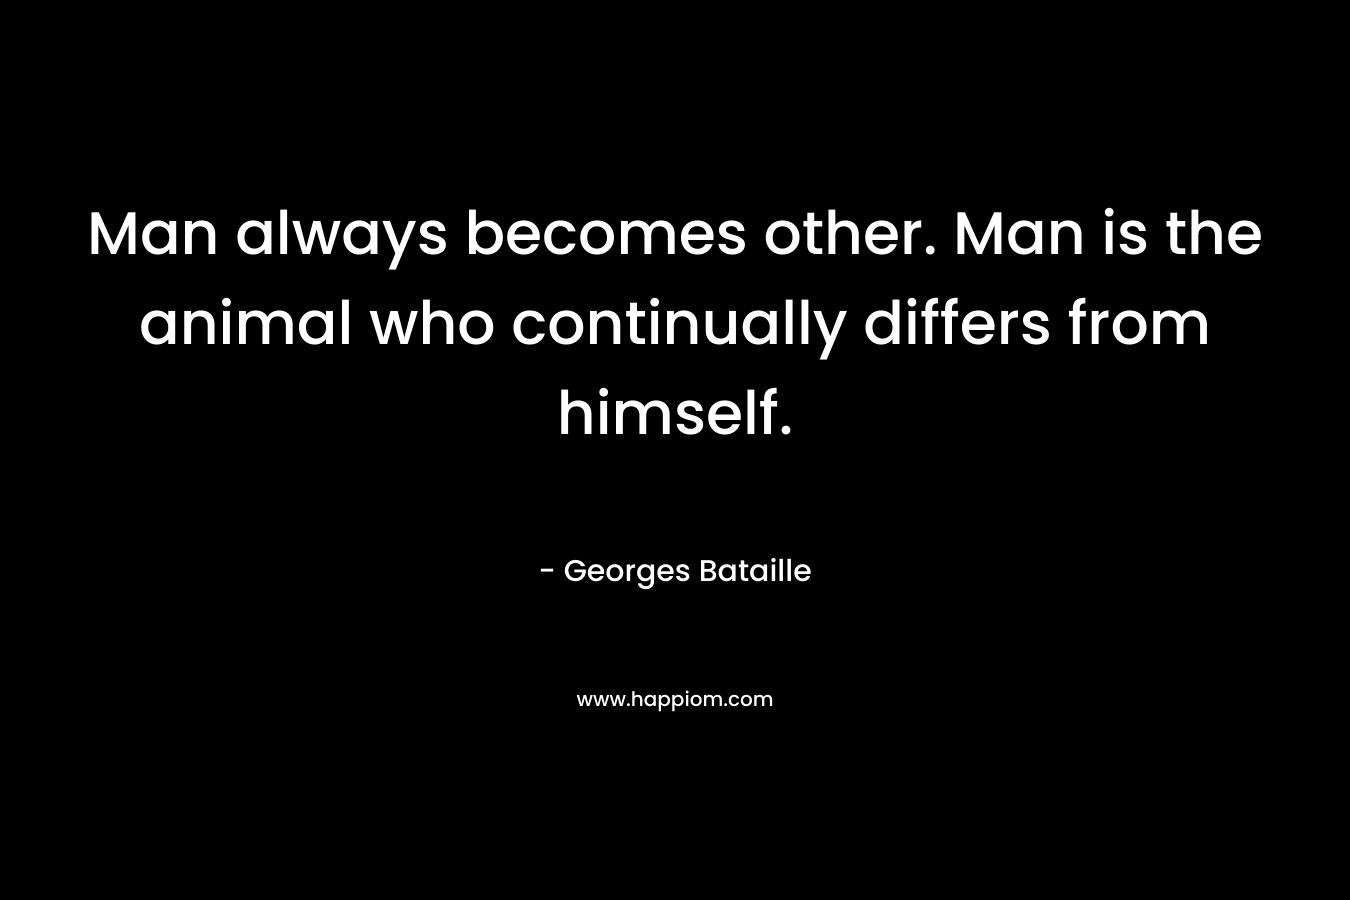 Man always becomes other. Man is the animal who continually differs from himself. – Georges Bataille